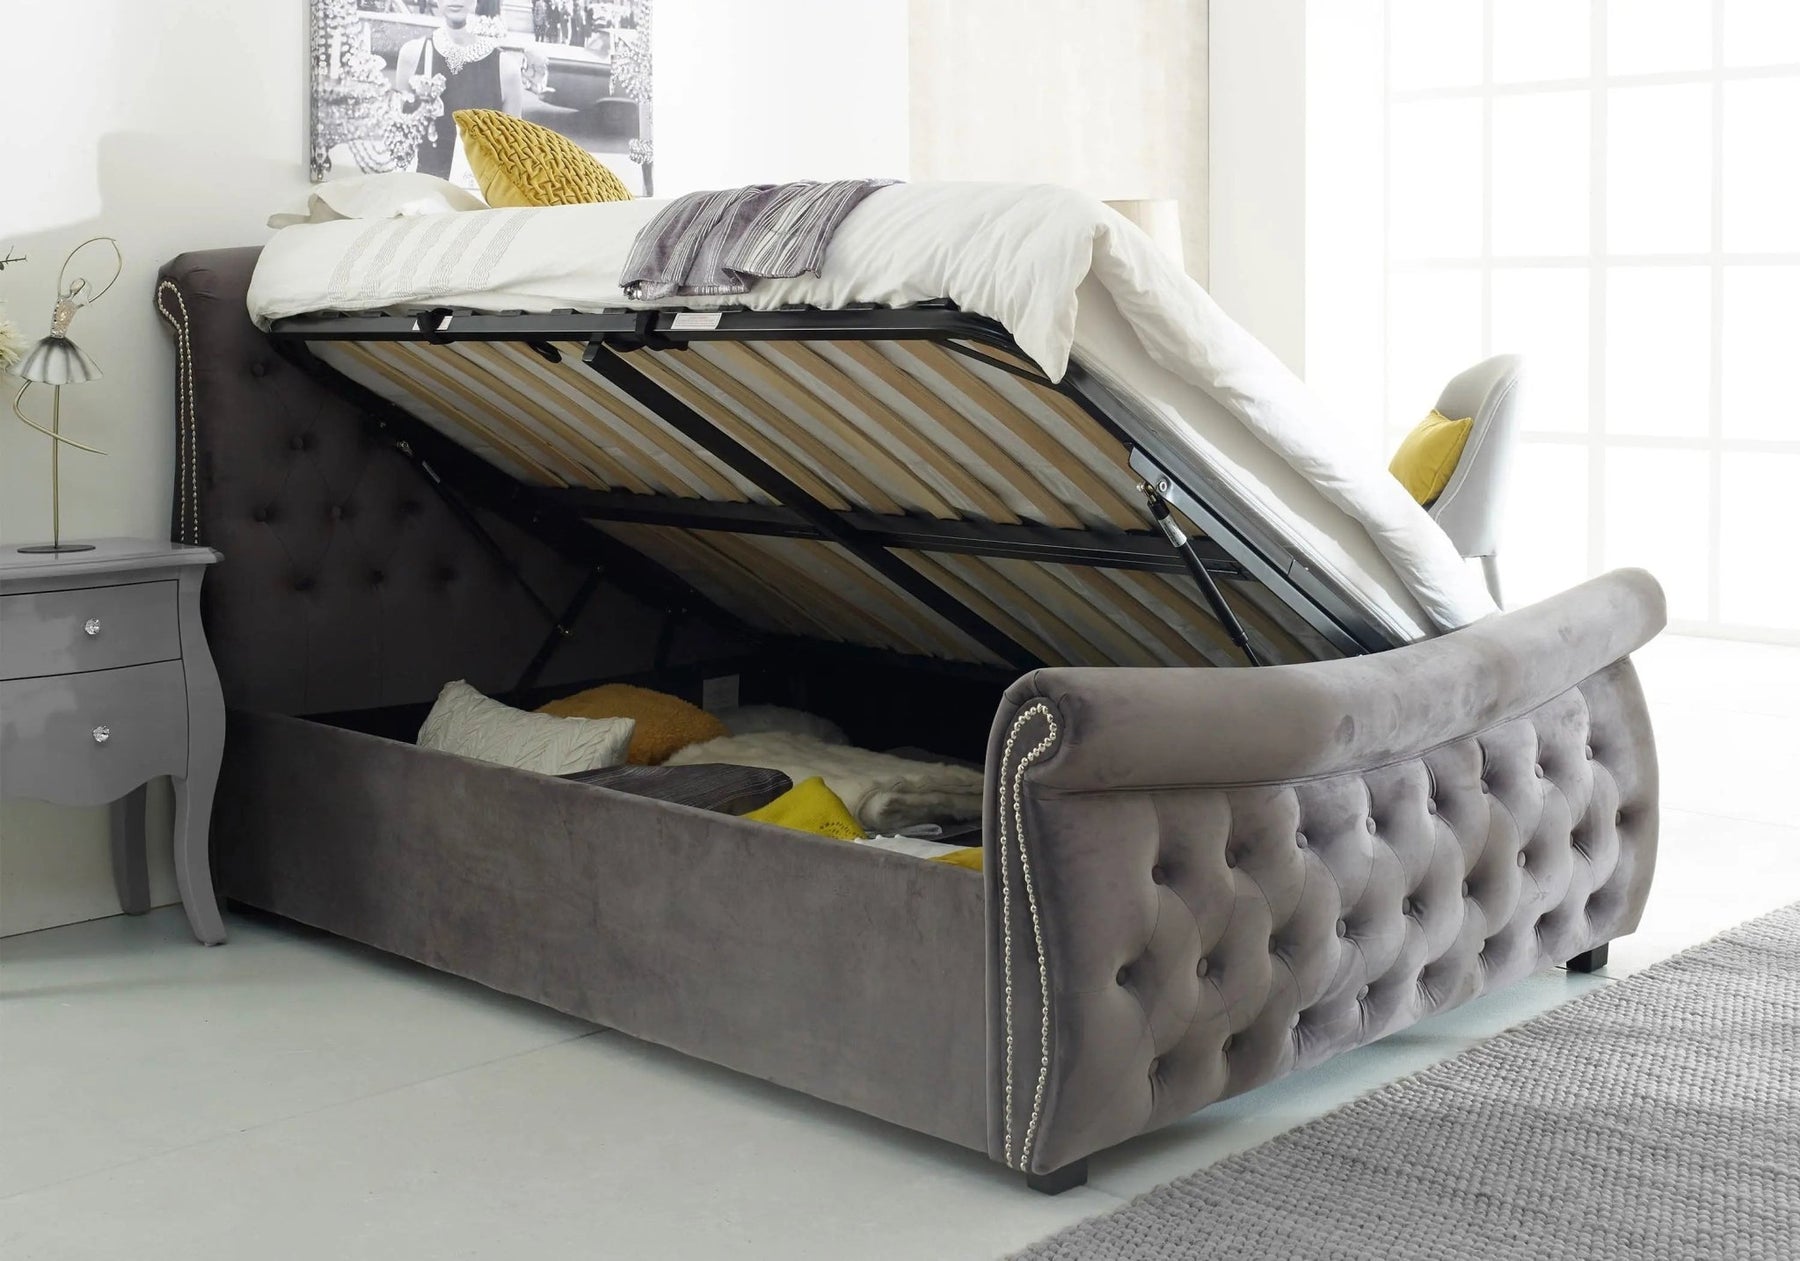 Why should you consider an Ottoman bed? - Rest Relax